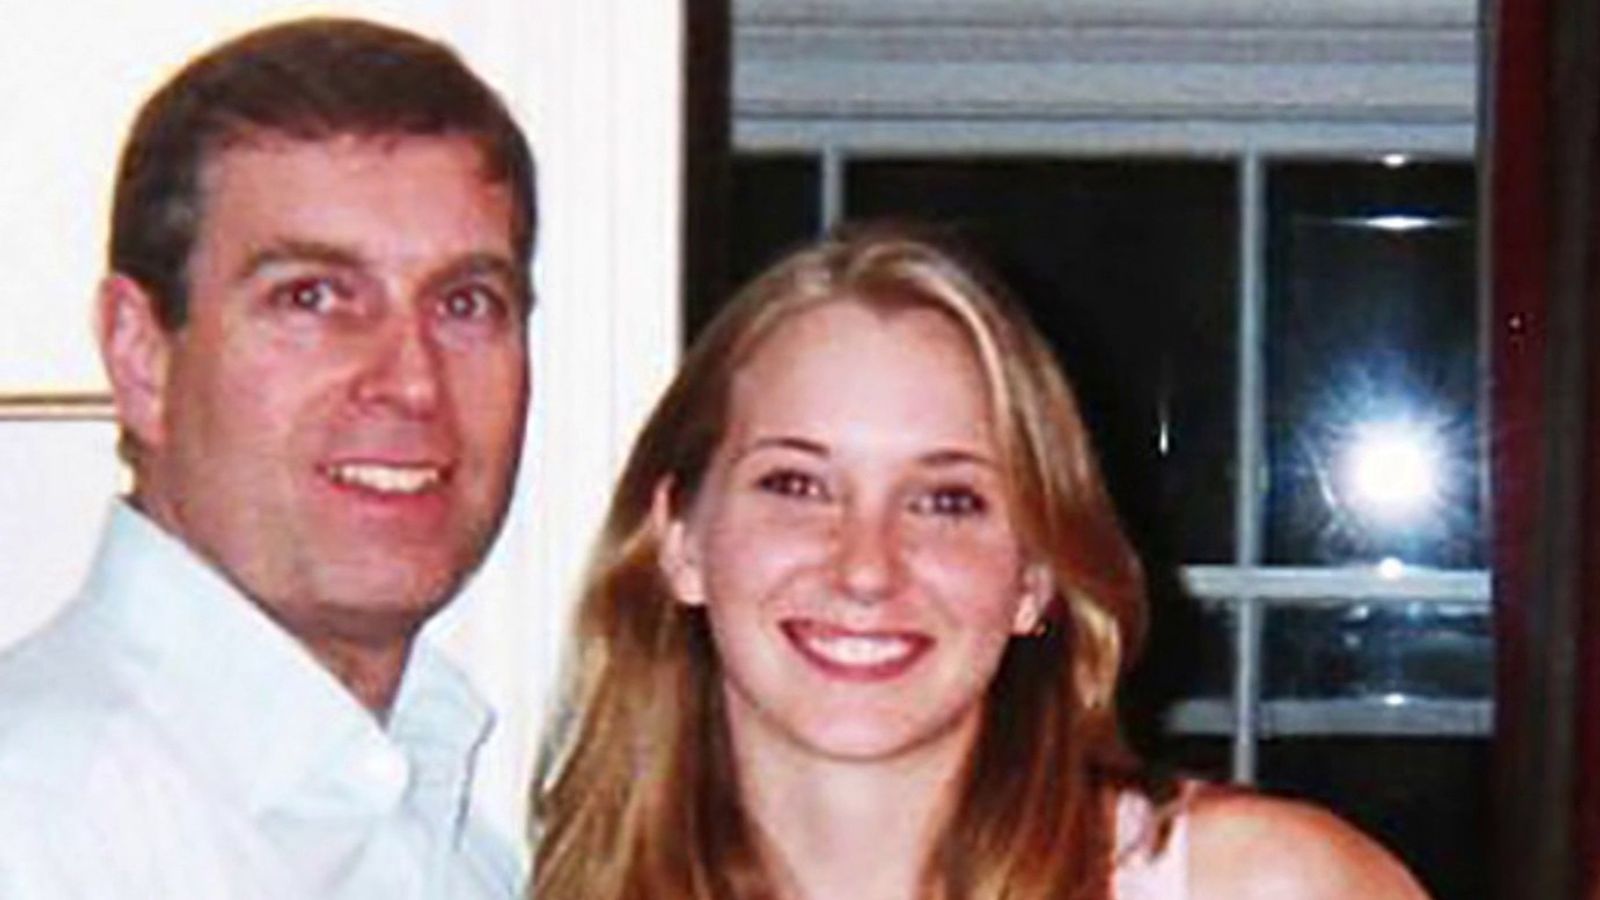 Prince Andrew: US lawsuit accuses royal of sexually abusing Virginia Giuffre,  an alleged victim of Jeffrey Epstein | UK News | Sky News